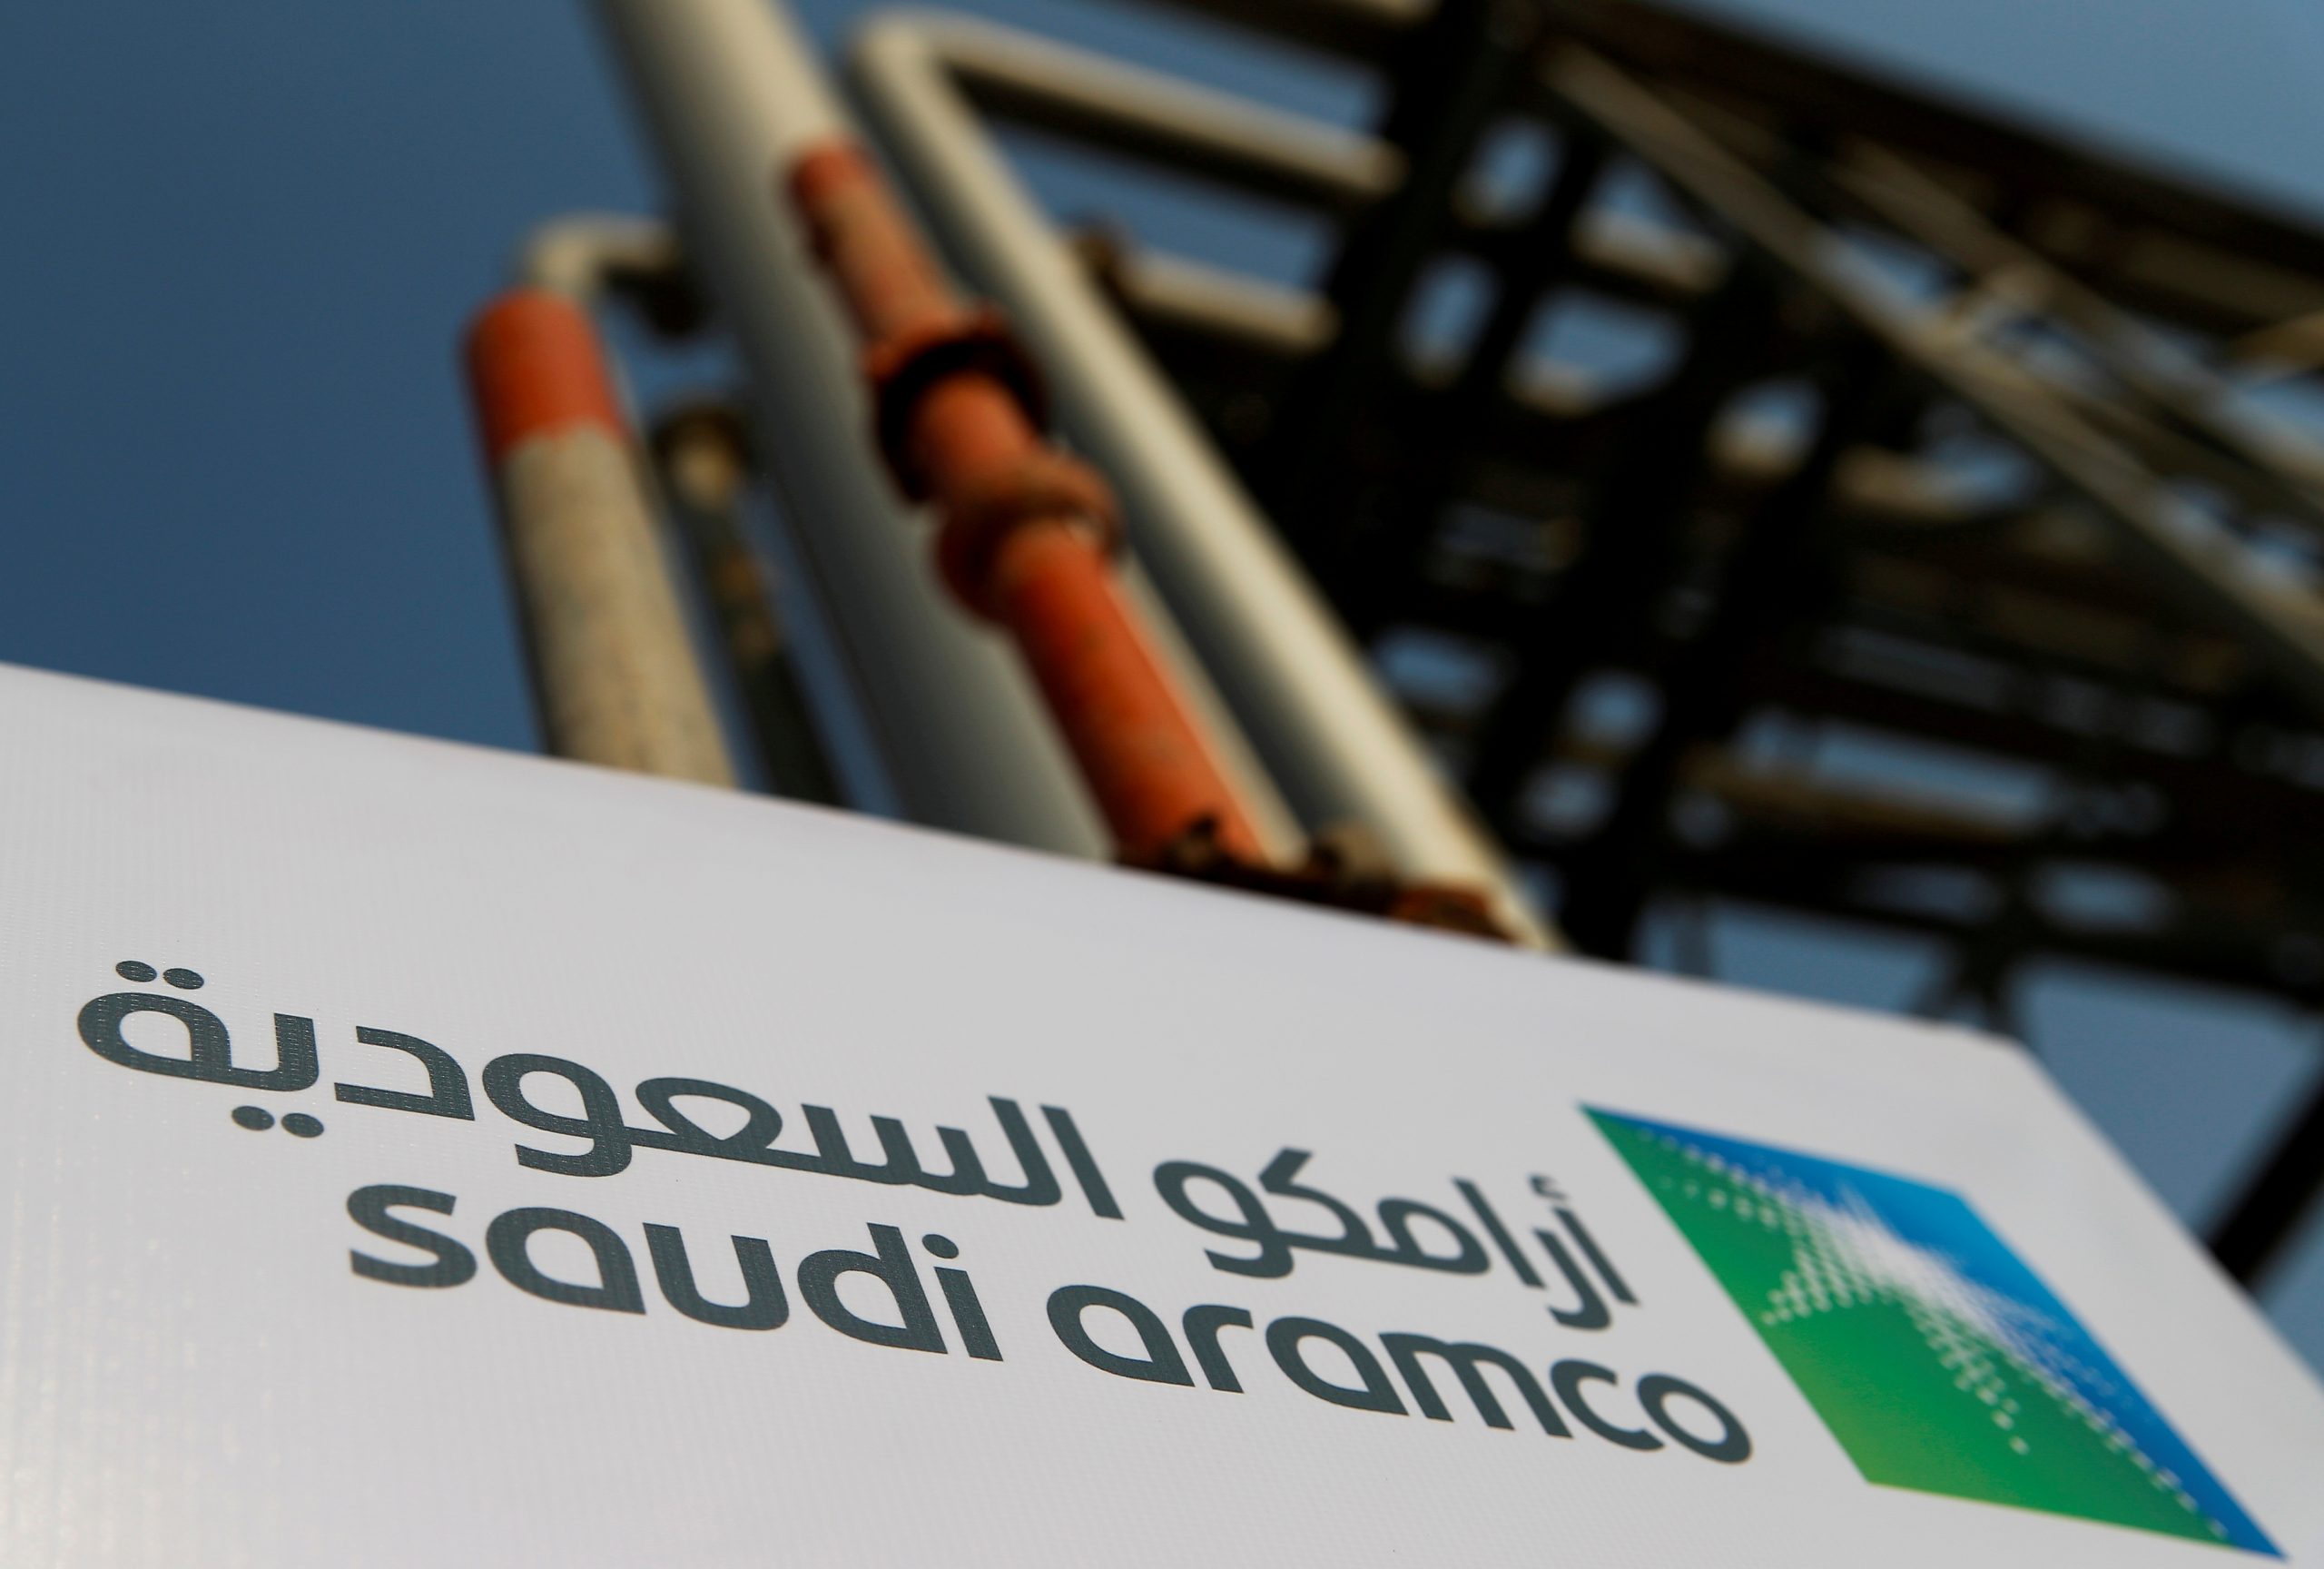  Analysis: Riding the oil price rebound: Gulf states to accelerate asset sales